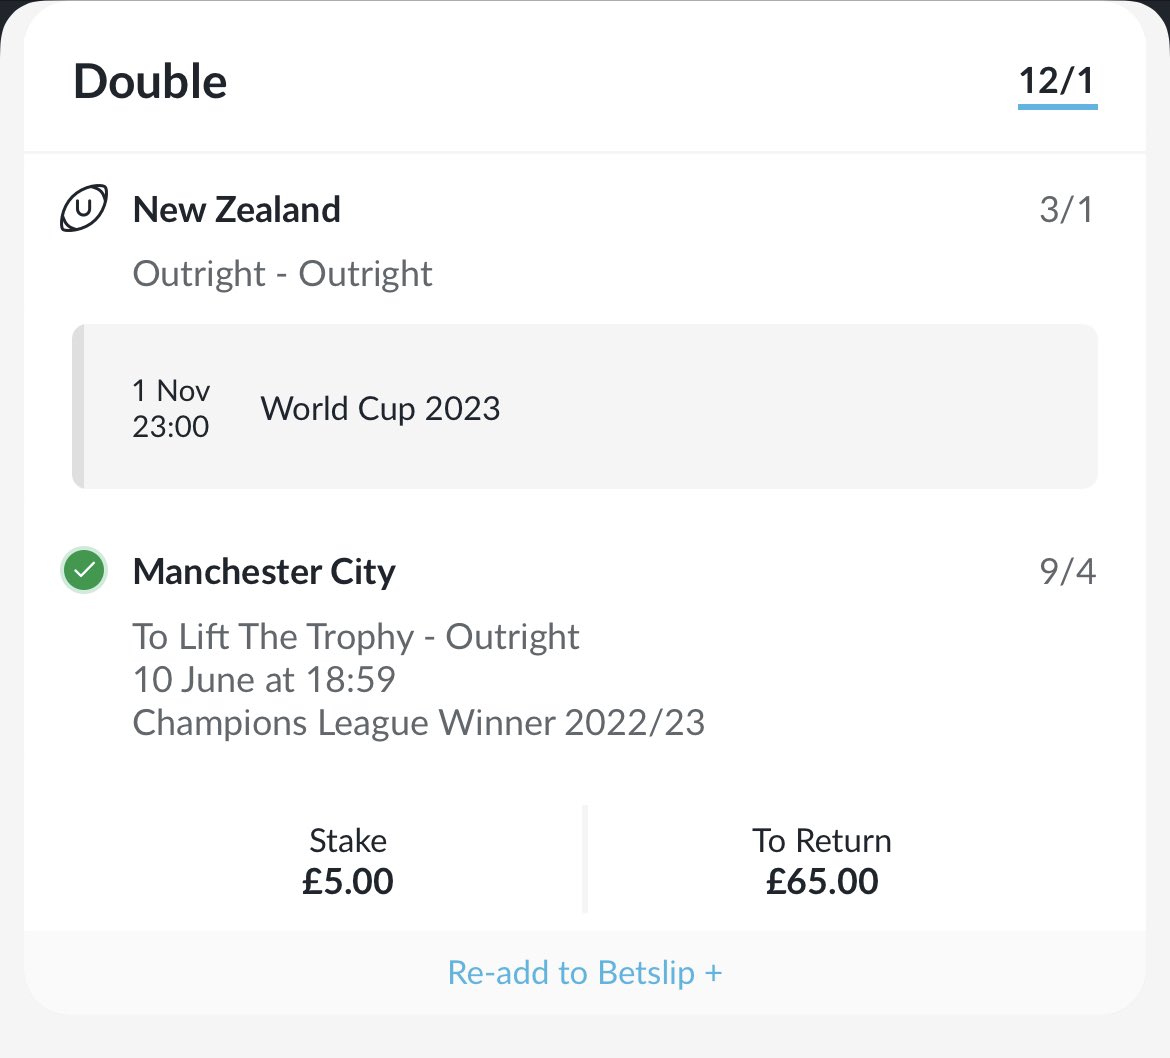 Over 55k (return) if the @AllBlacks win the @rugbyworldcup @France2023 

Another bet landed, thank you @ManCity